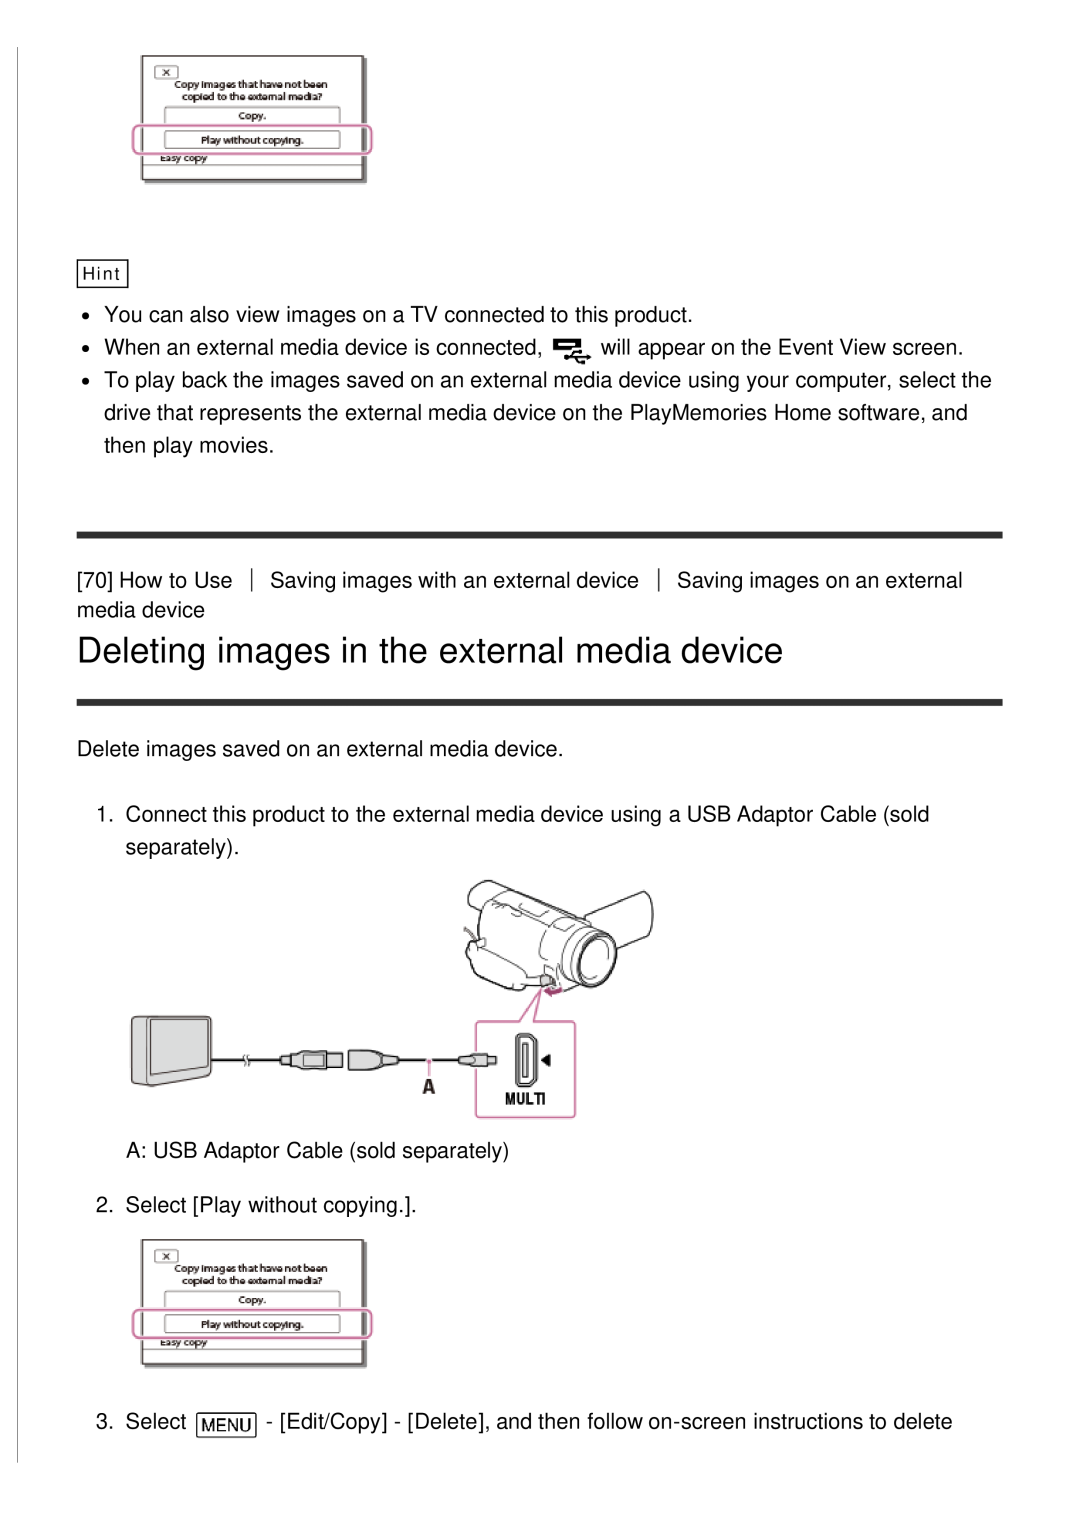 Sony HDR-CX900E, FDR-AX100E manual Deleting images in the external media device 